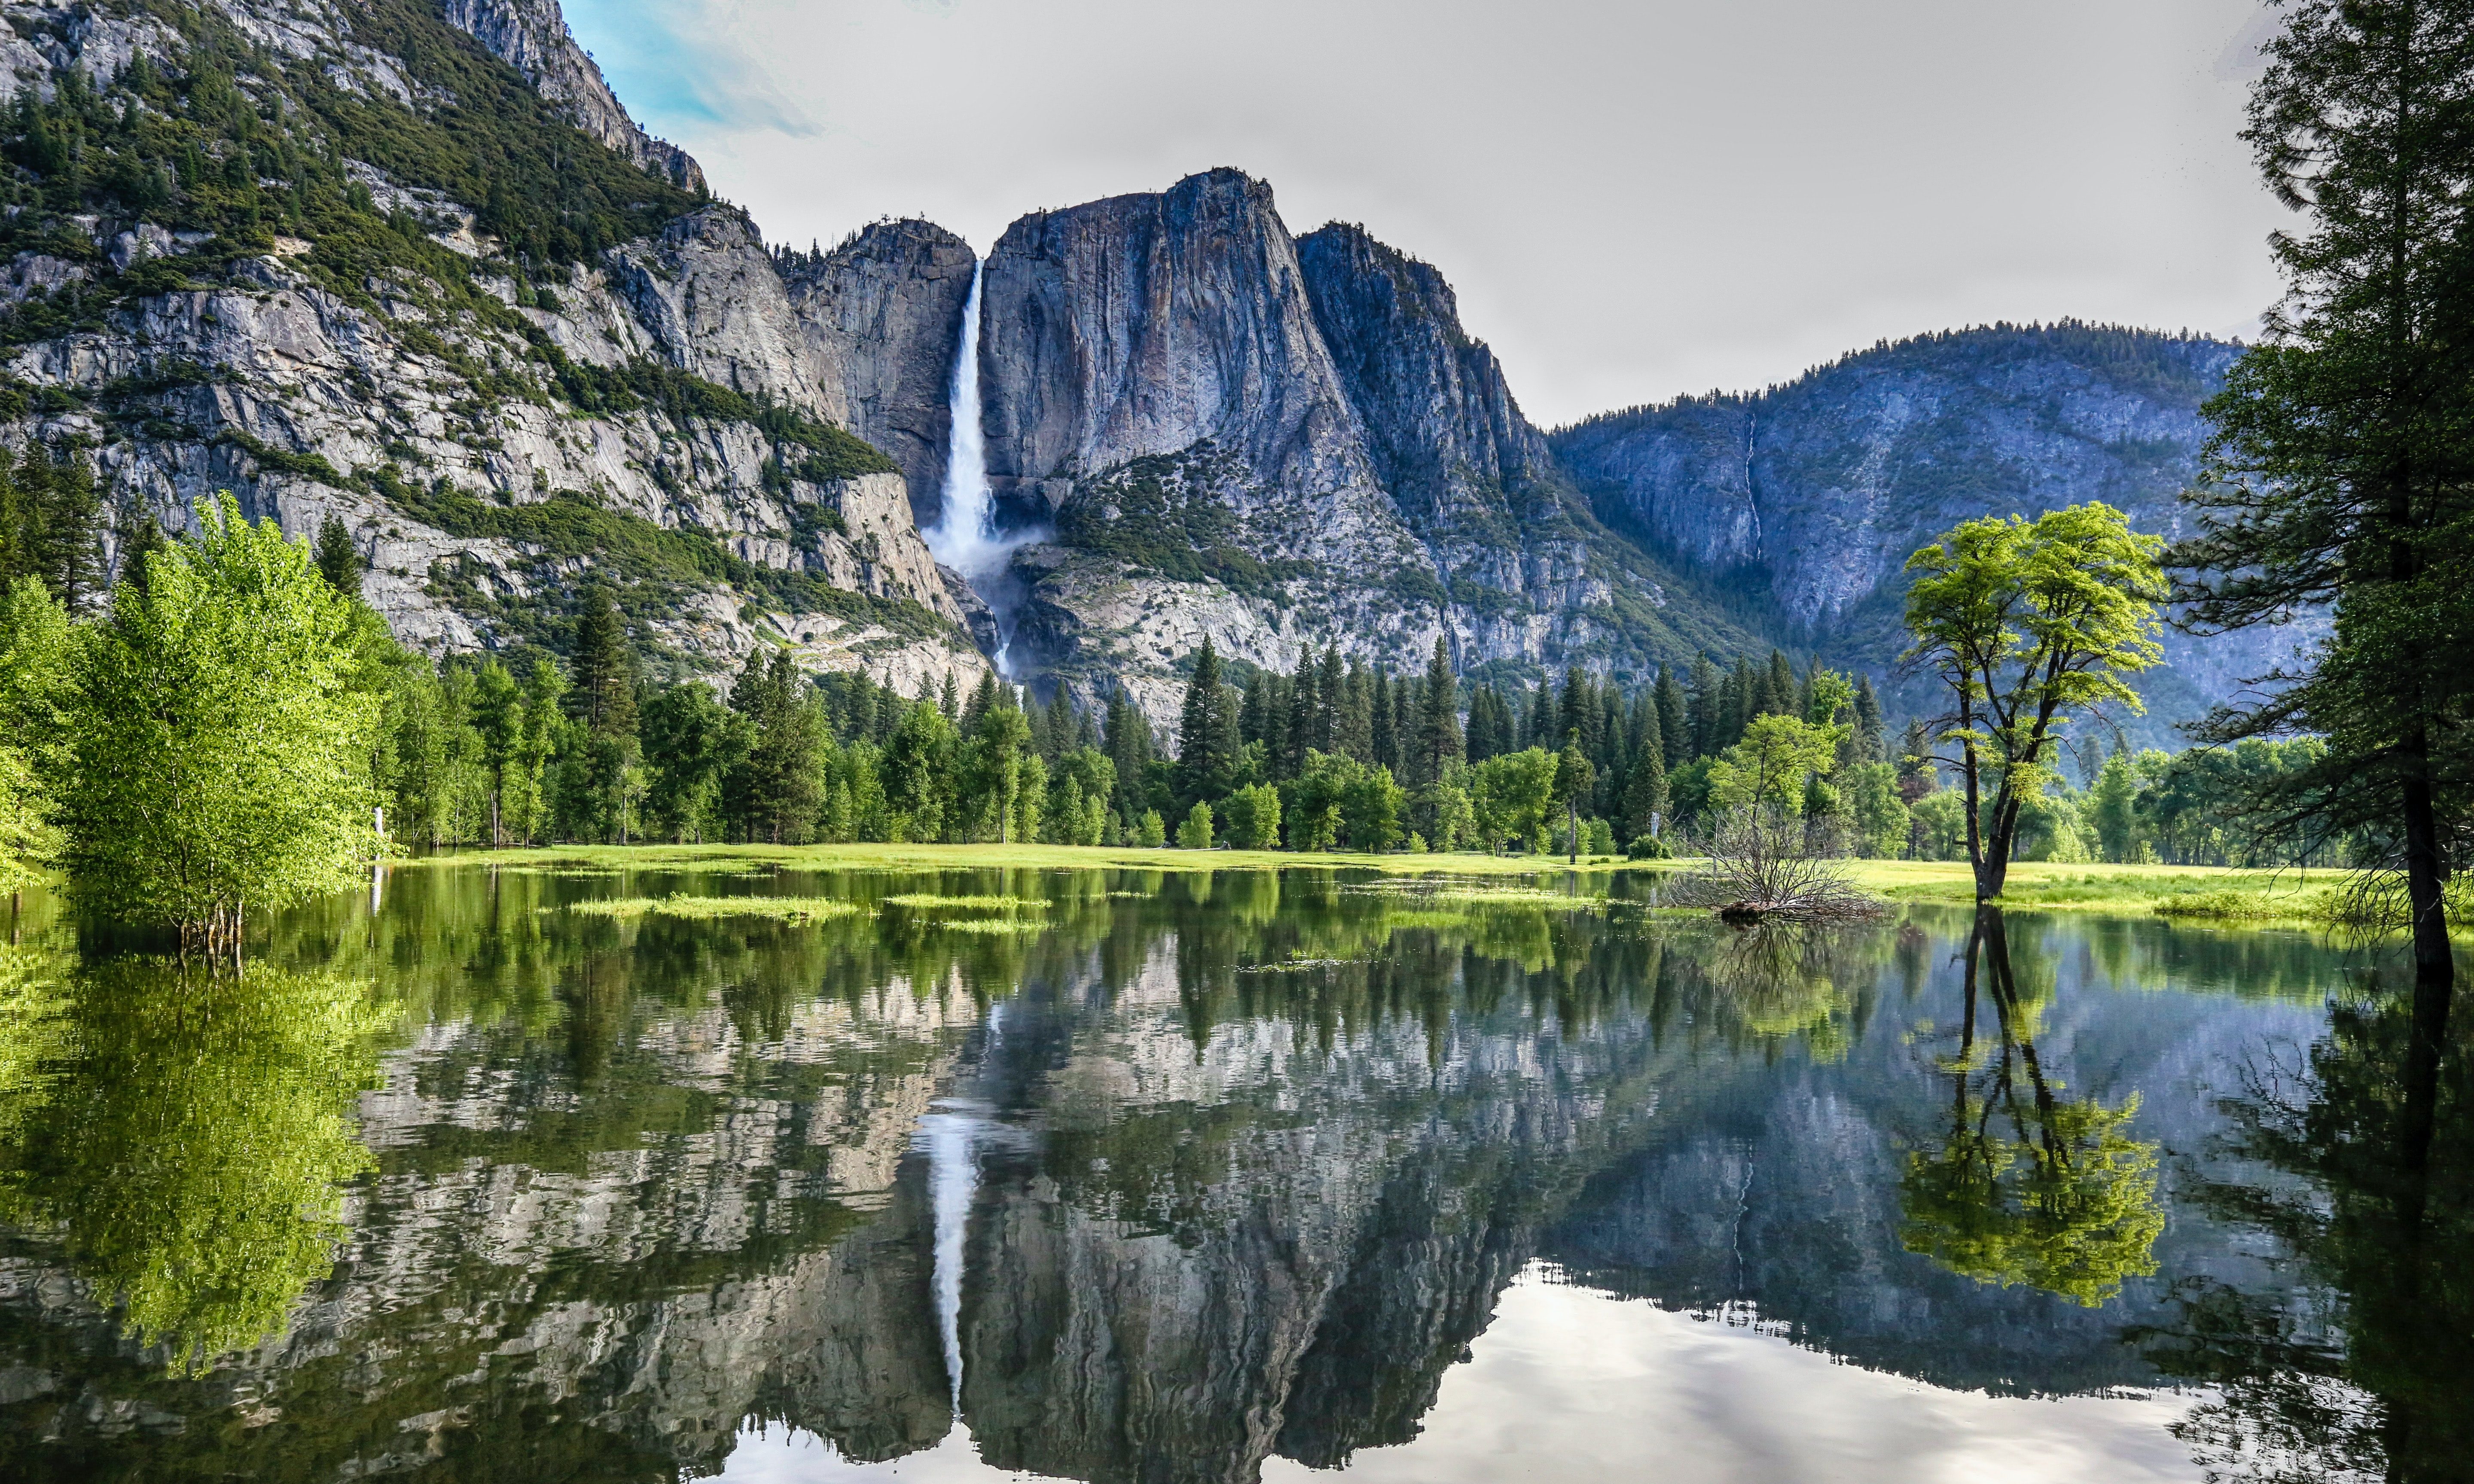 Top 10 eco tourism areas worth visiting in the United States